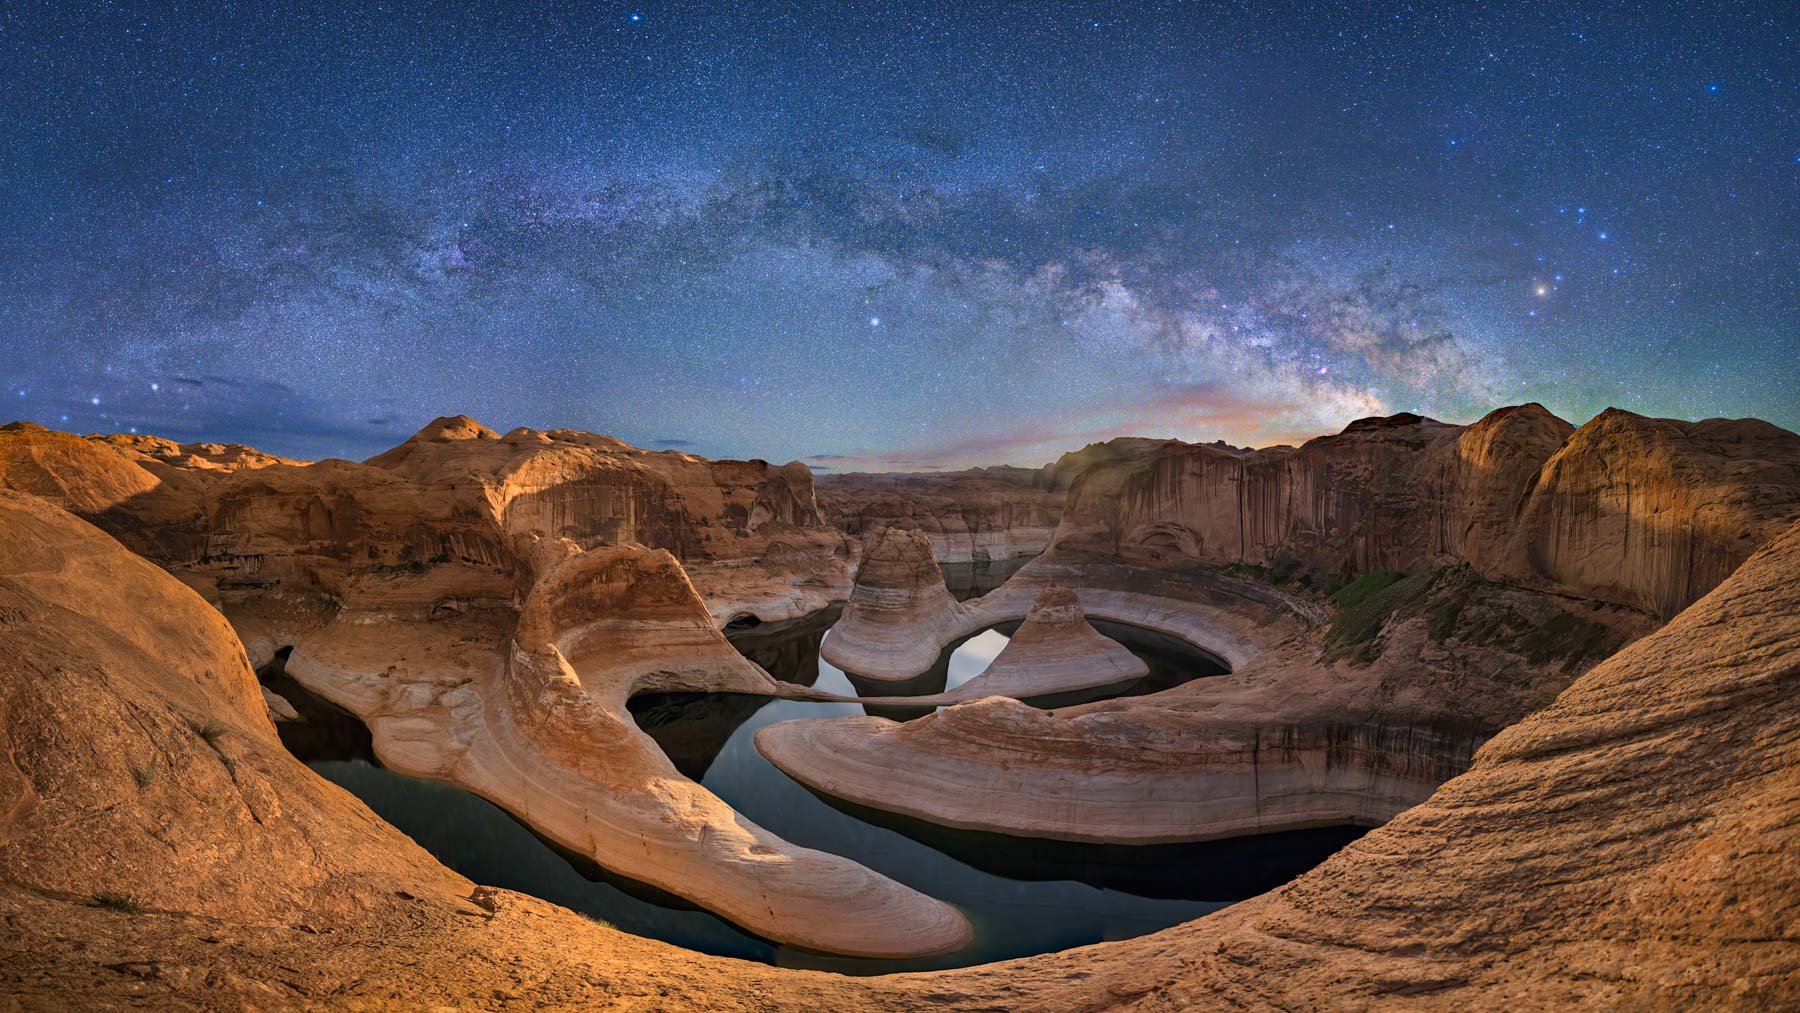 The Milky Way rising over Reflection Canyon